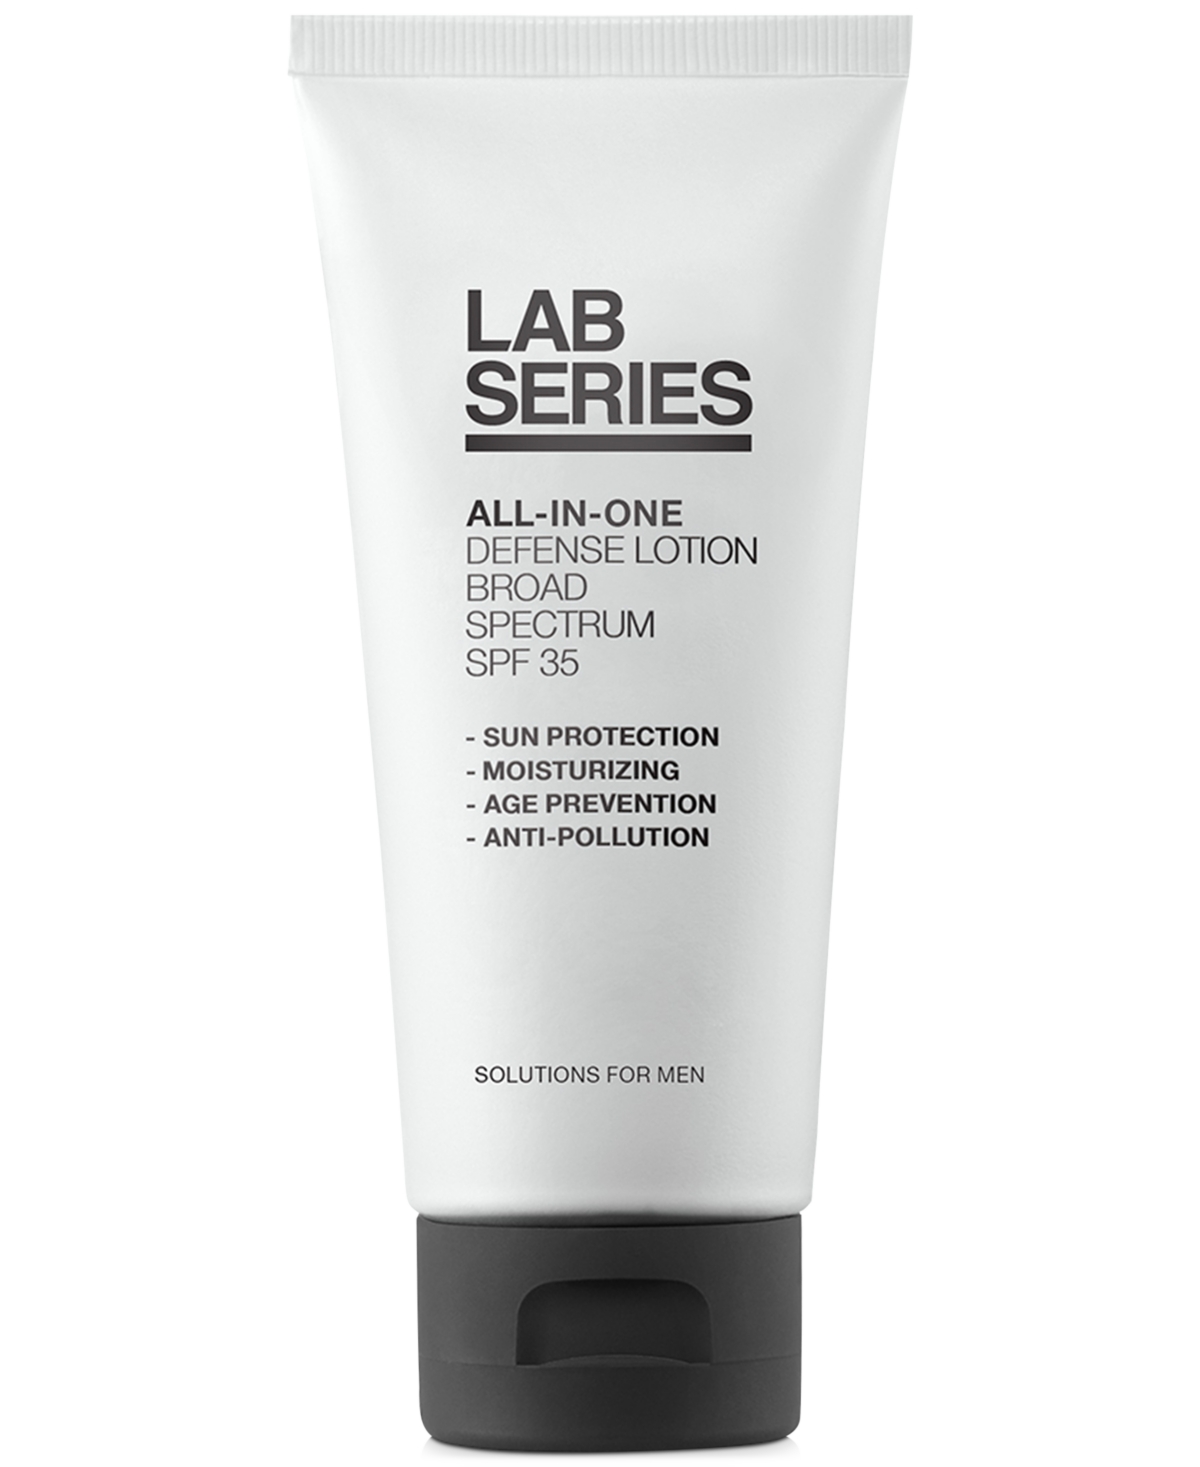 Skincare for Men All-In-One Defense Lotion Spf 35, 3.4-oz.